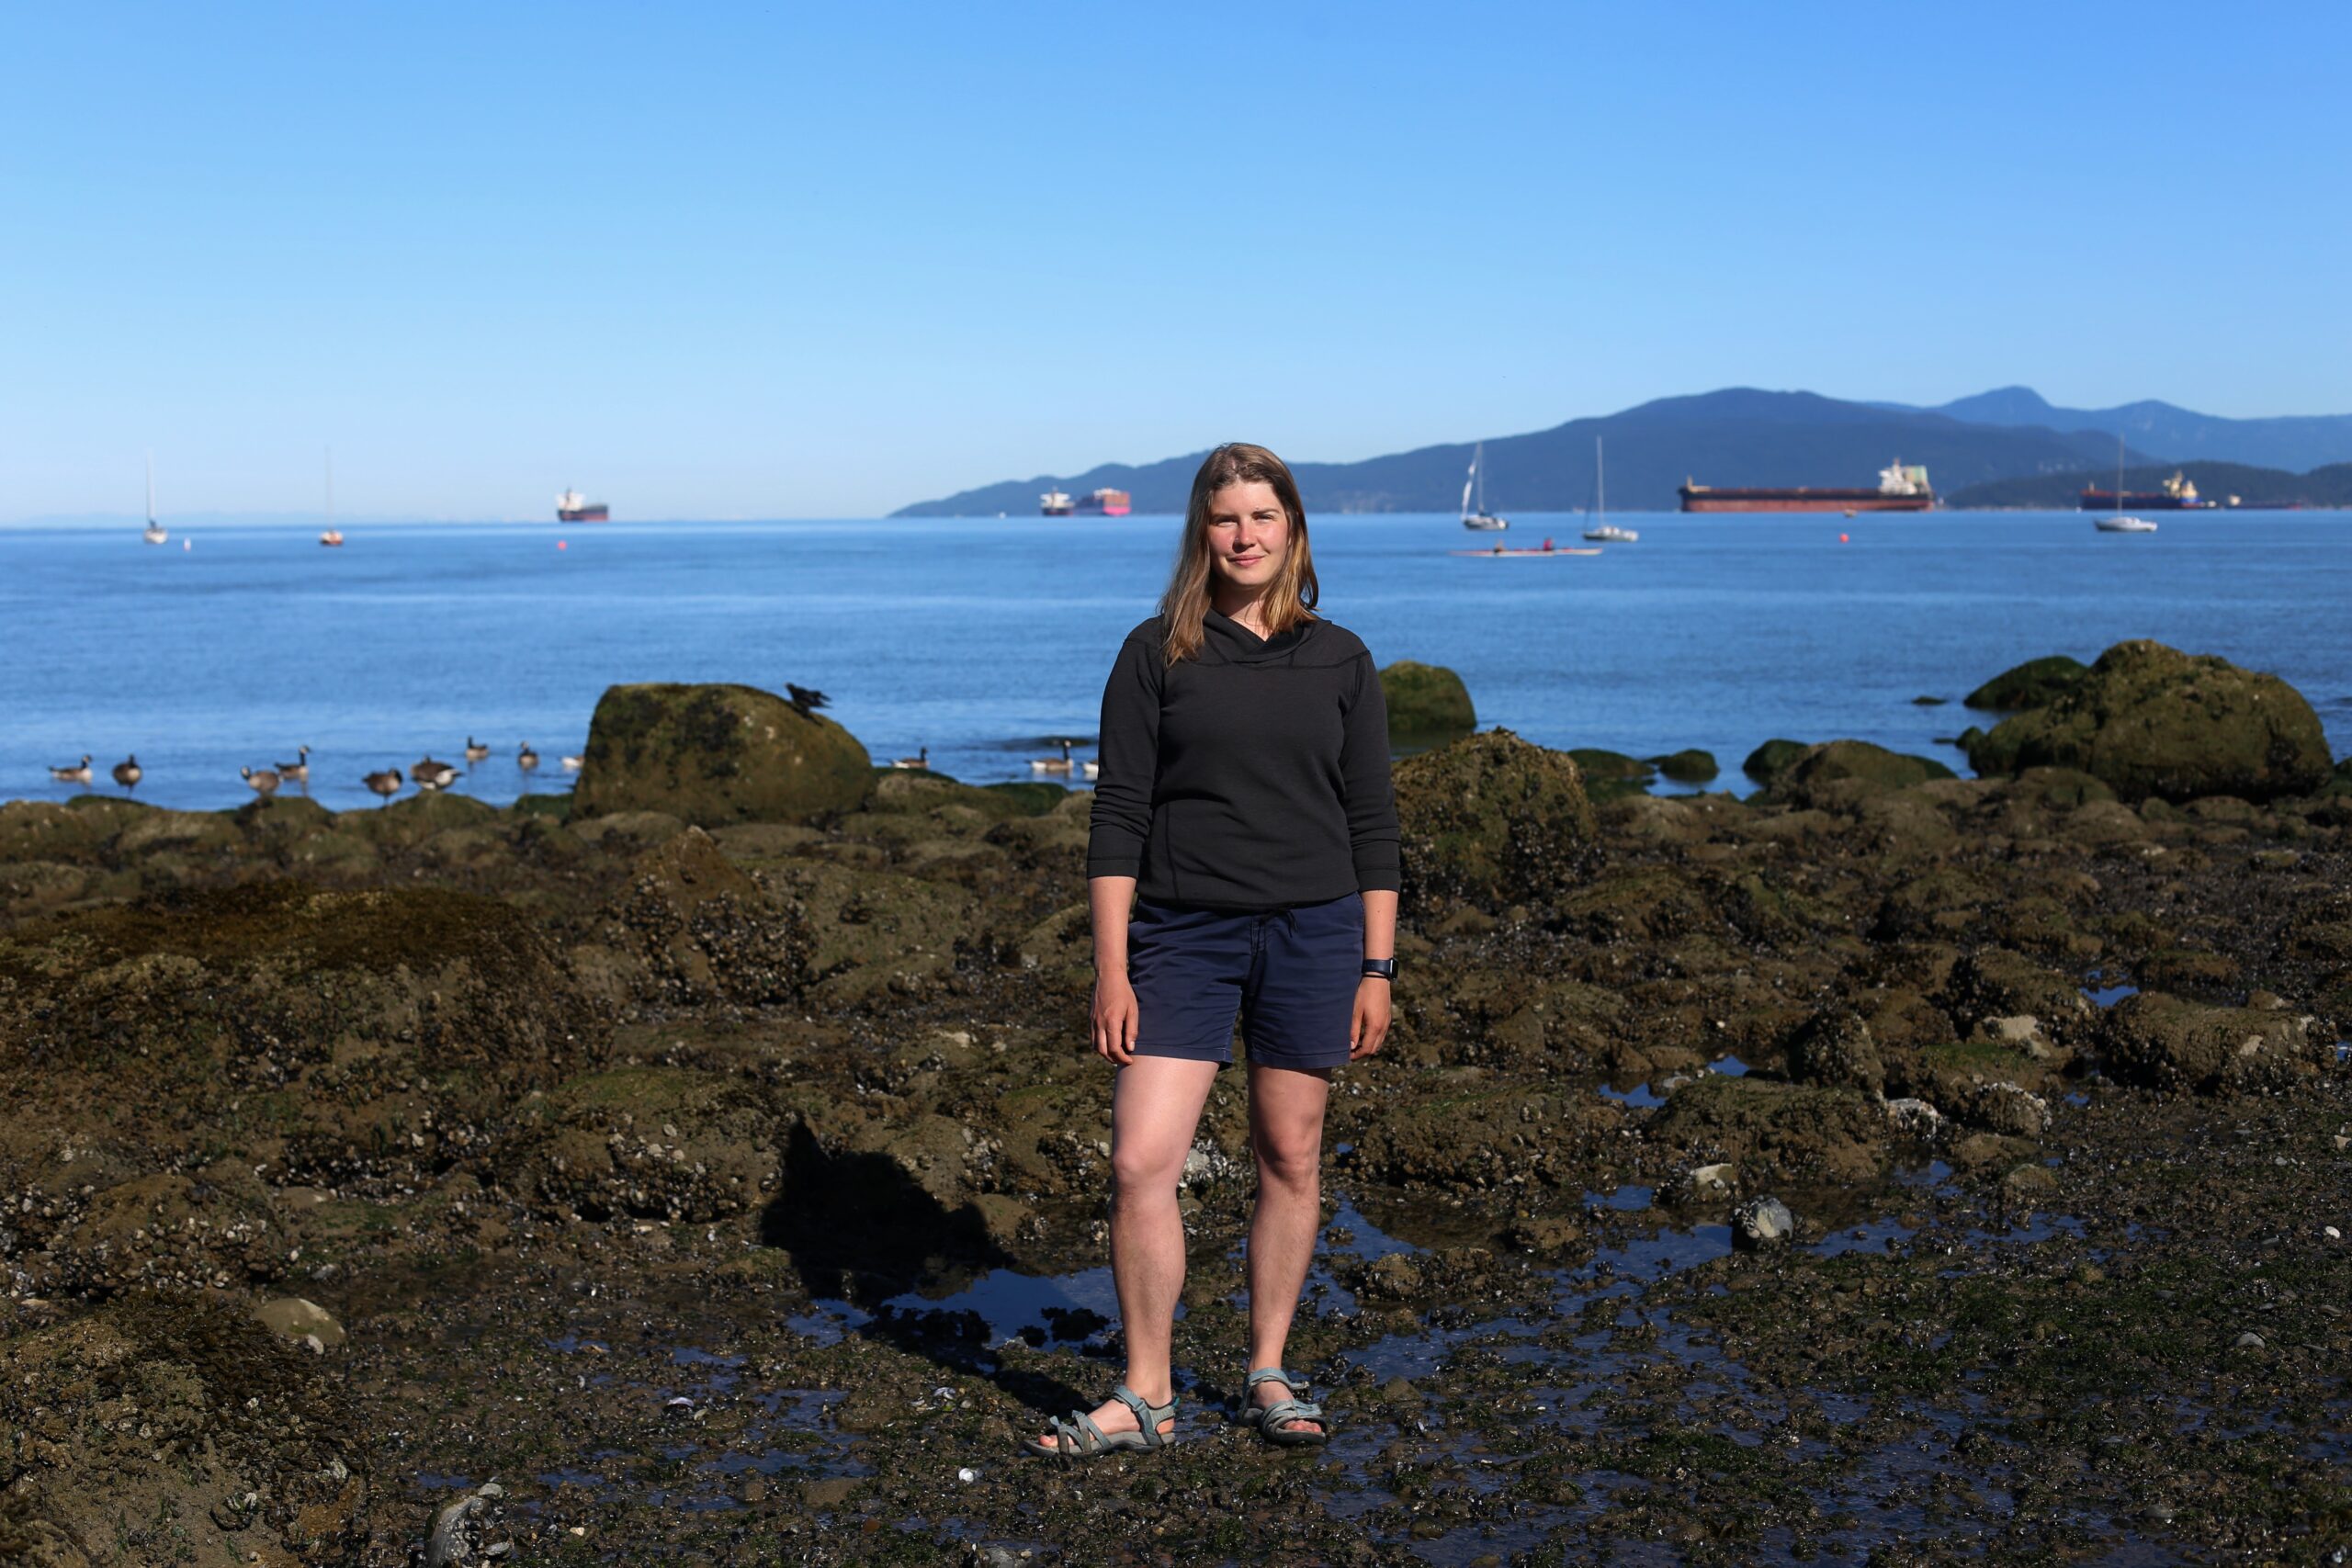 Amelia Hesketh, a research at the University of British Columbia stands in the intertidal zone at low tide on Kitsilano Beach with the ocean behind her and tanker ships visible in the distance.